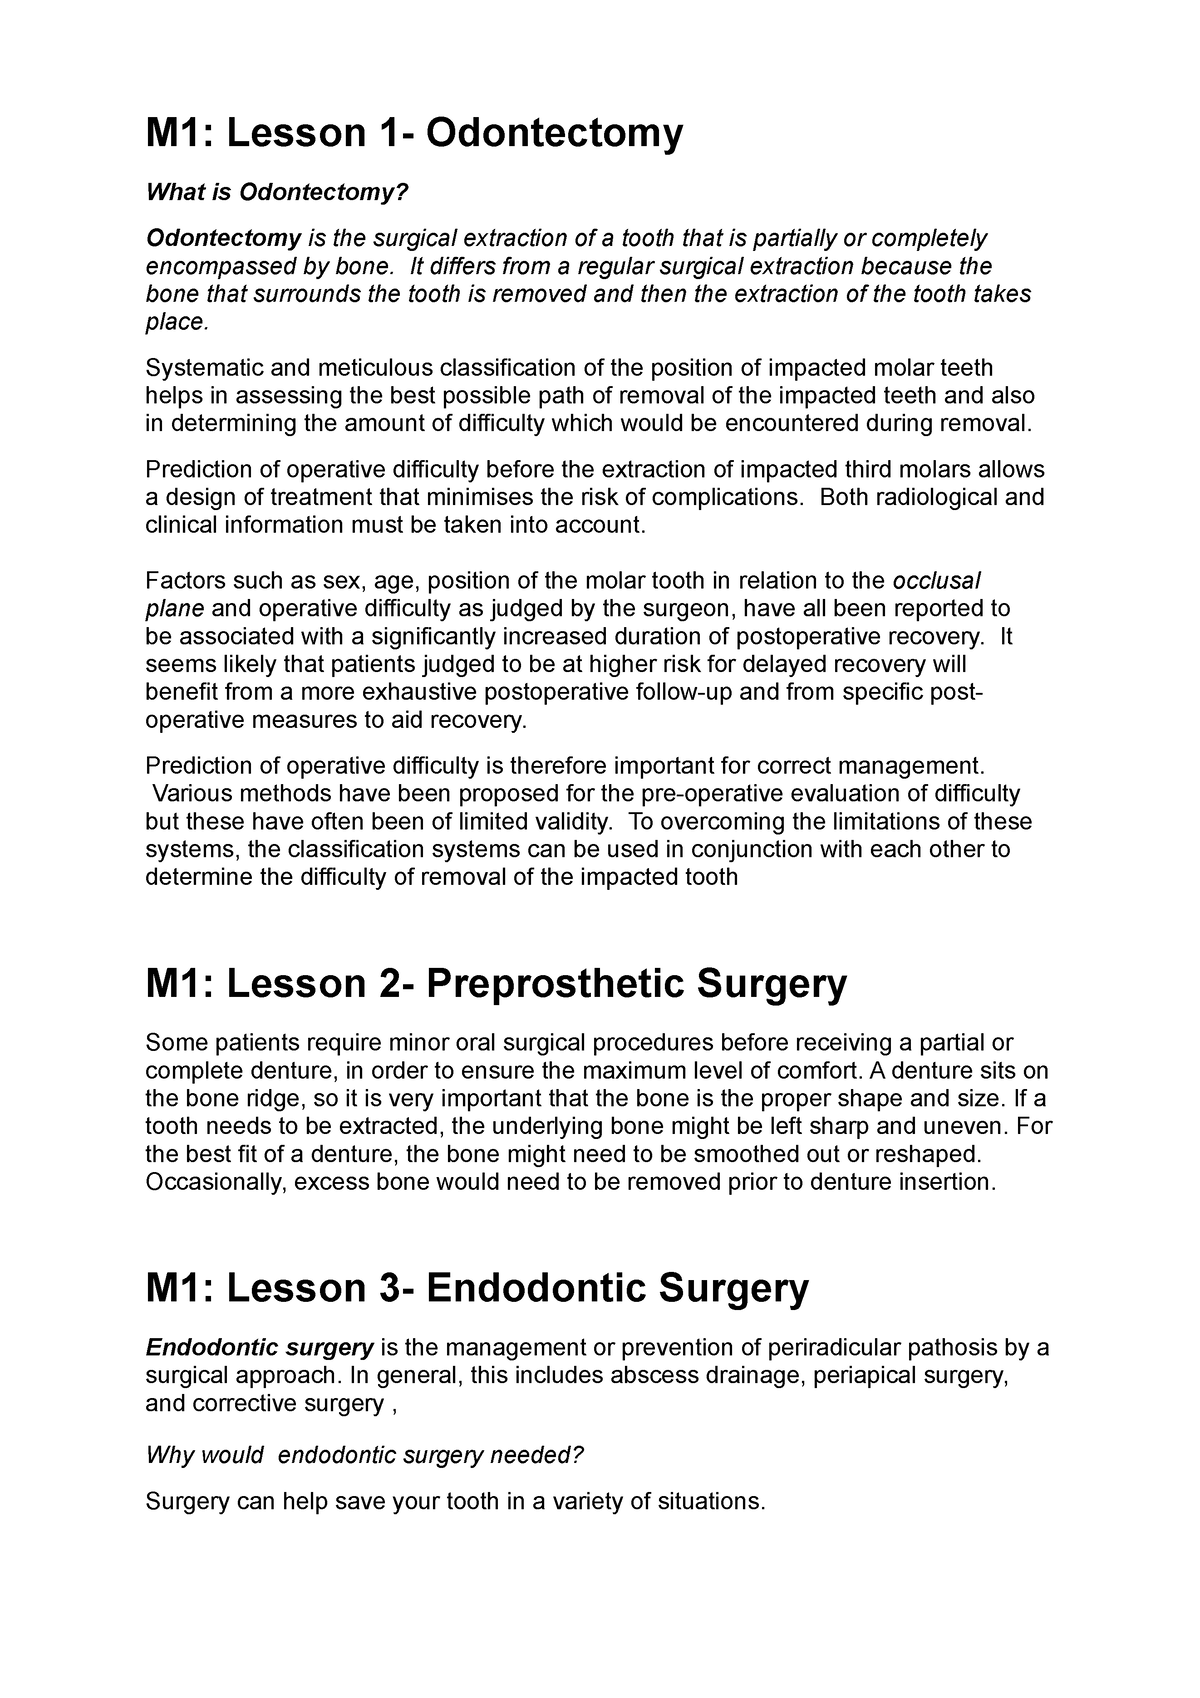 M1L1-3 - summary to all lectures - M1: Lesson 1- Odontectomy What is ...